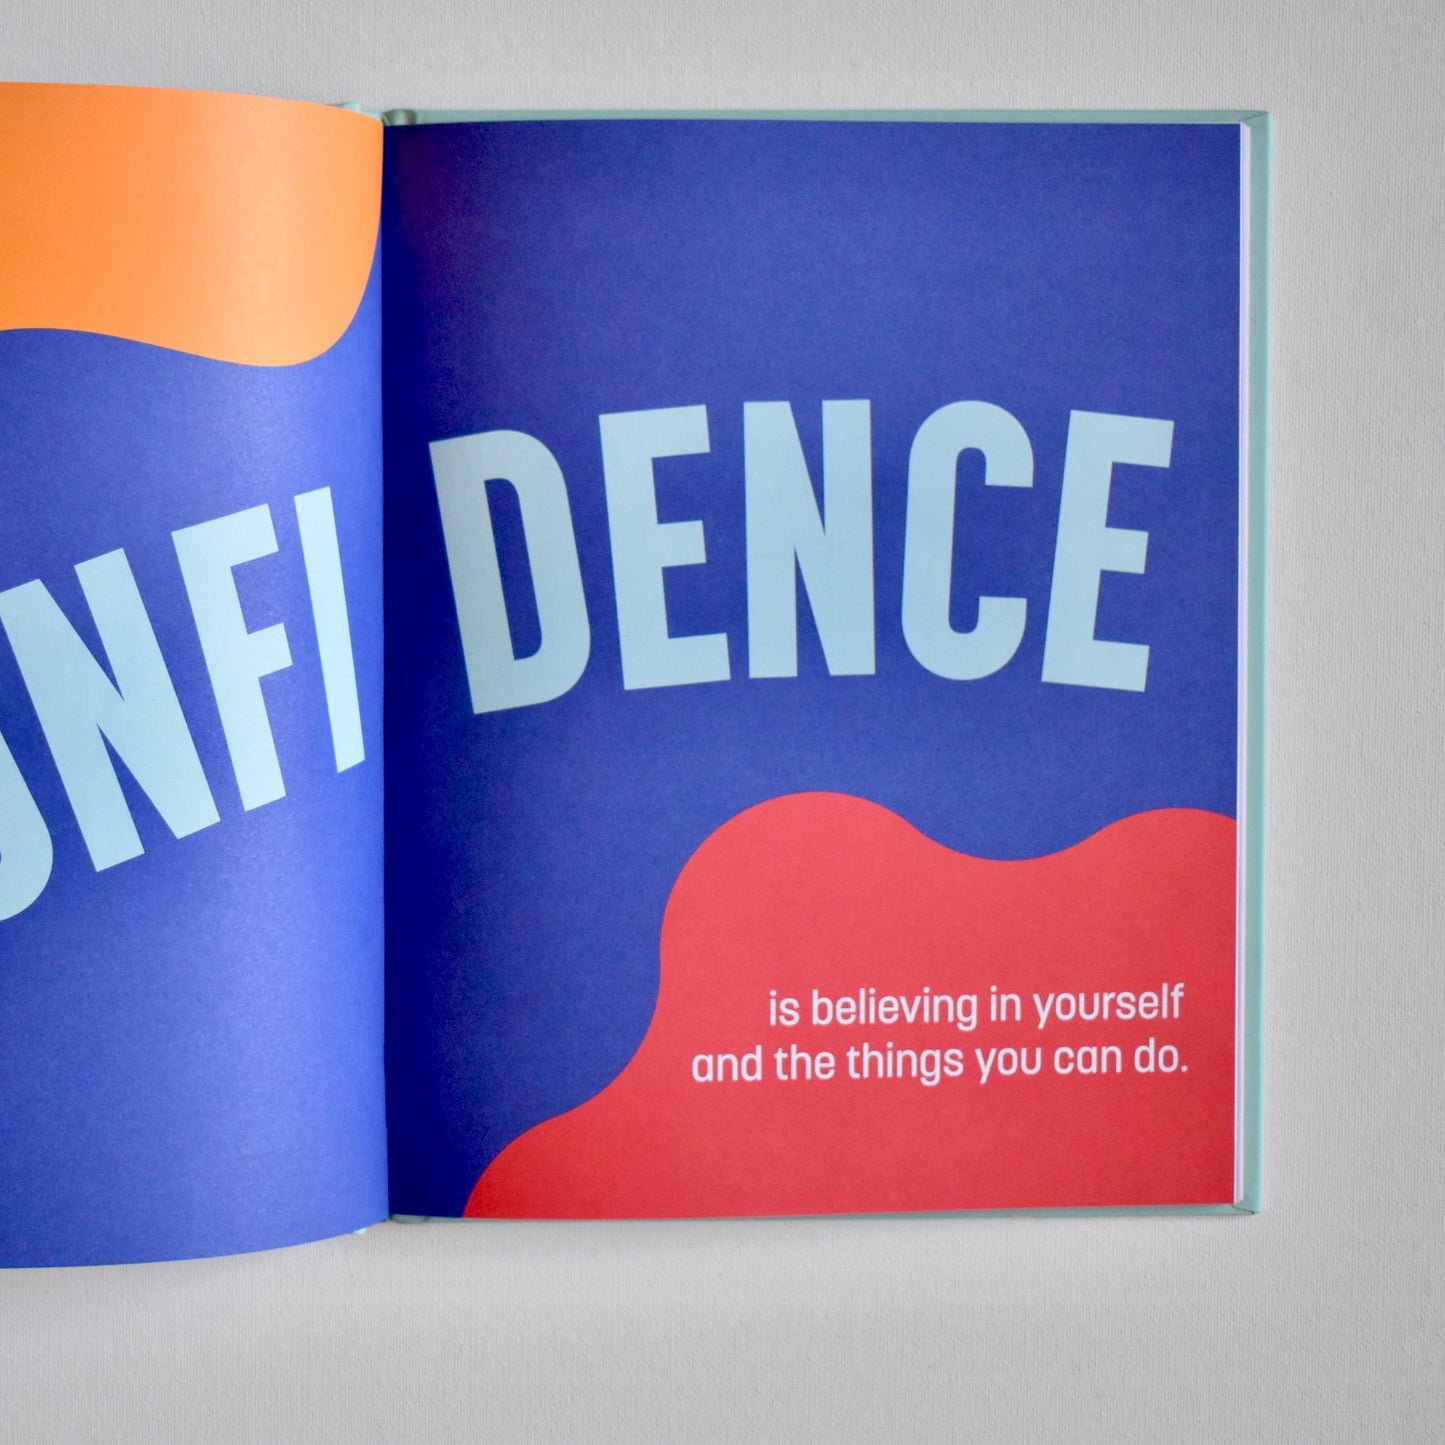 A Kids Book About Confidence